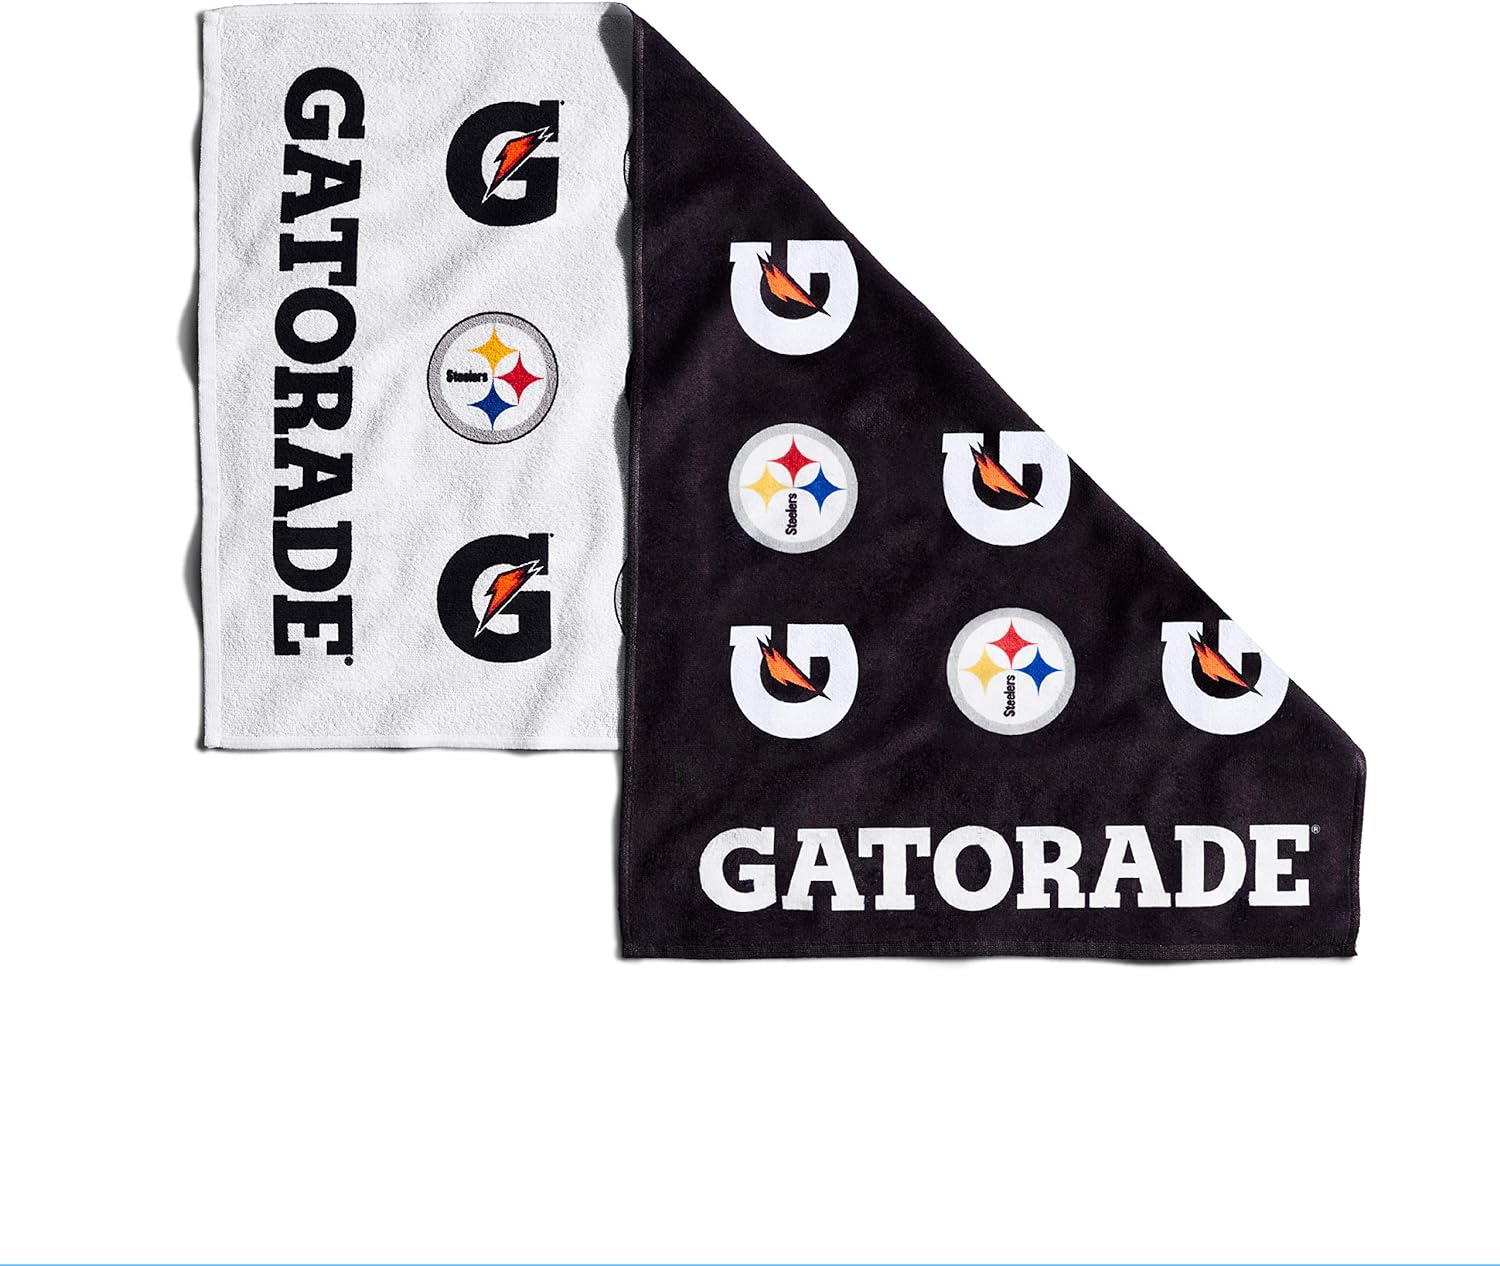 21" x 39" Gatorade NFL Team Towels: Chicago Bears $3.90 or Pittsburgh Steelers $6.90 + Free Shipping w/ Prime or on $35+ $3.91